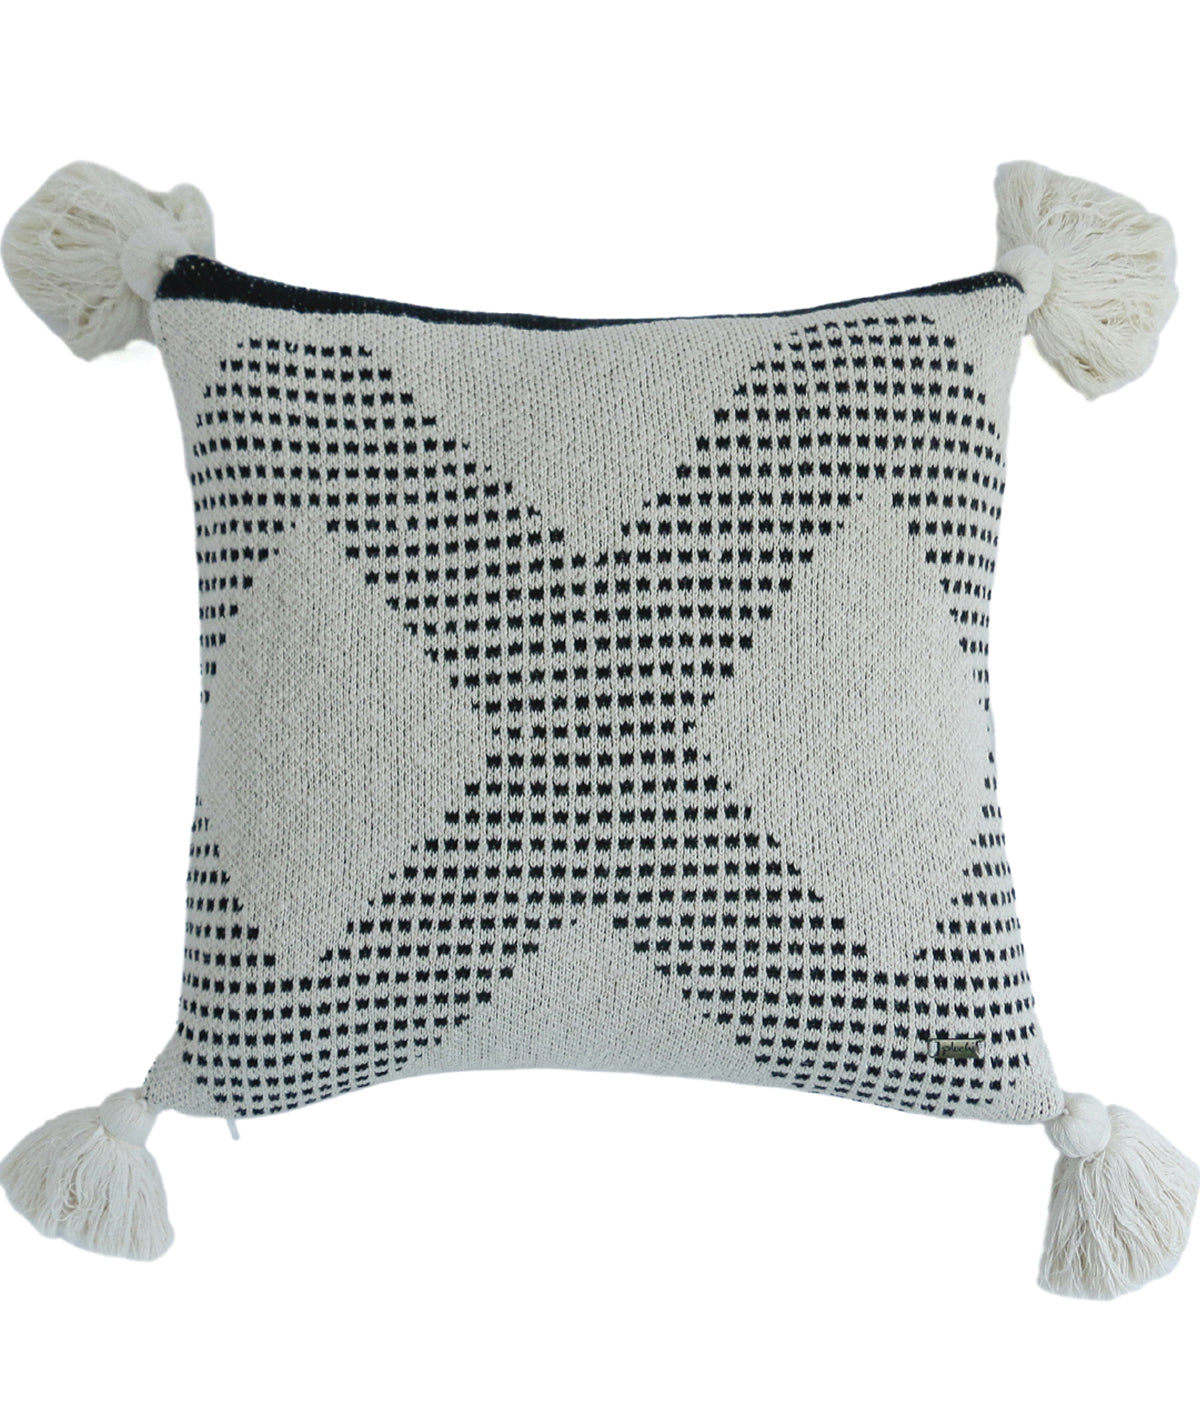 Diamond Check Cotton Knitted Decorative Black & Natural Color 20 x 20 Inches Cushion Cover